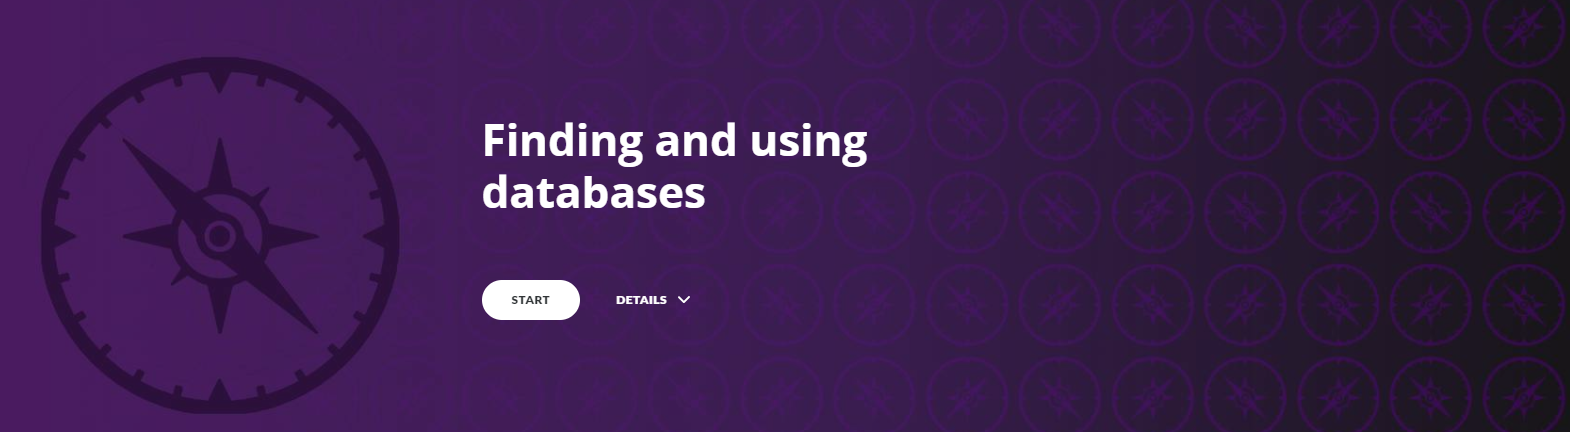 Finding and using databases